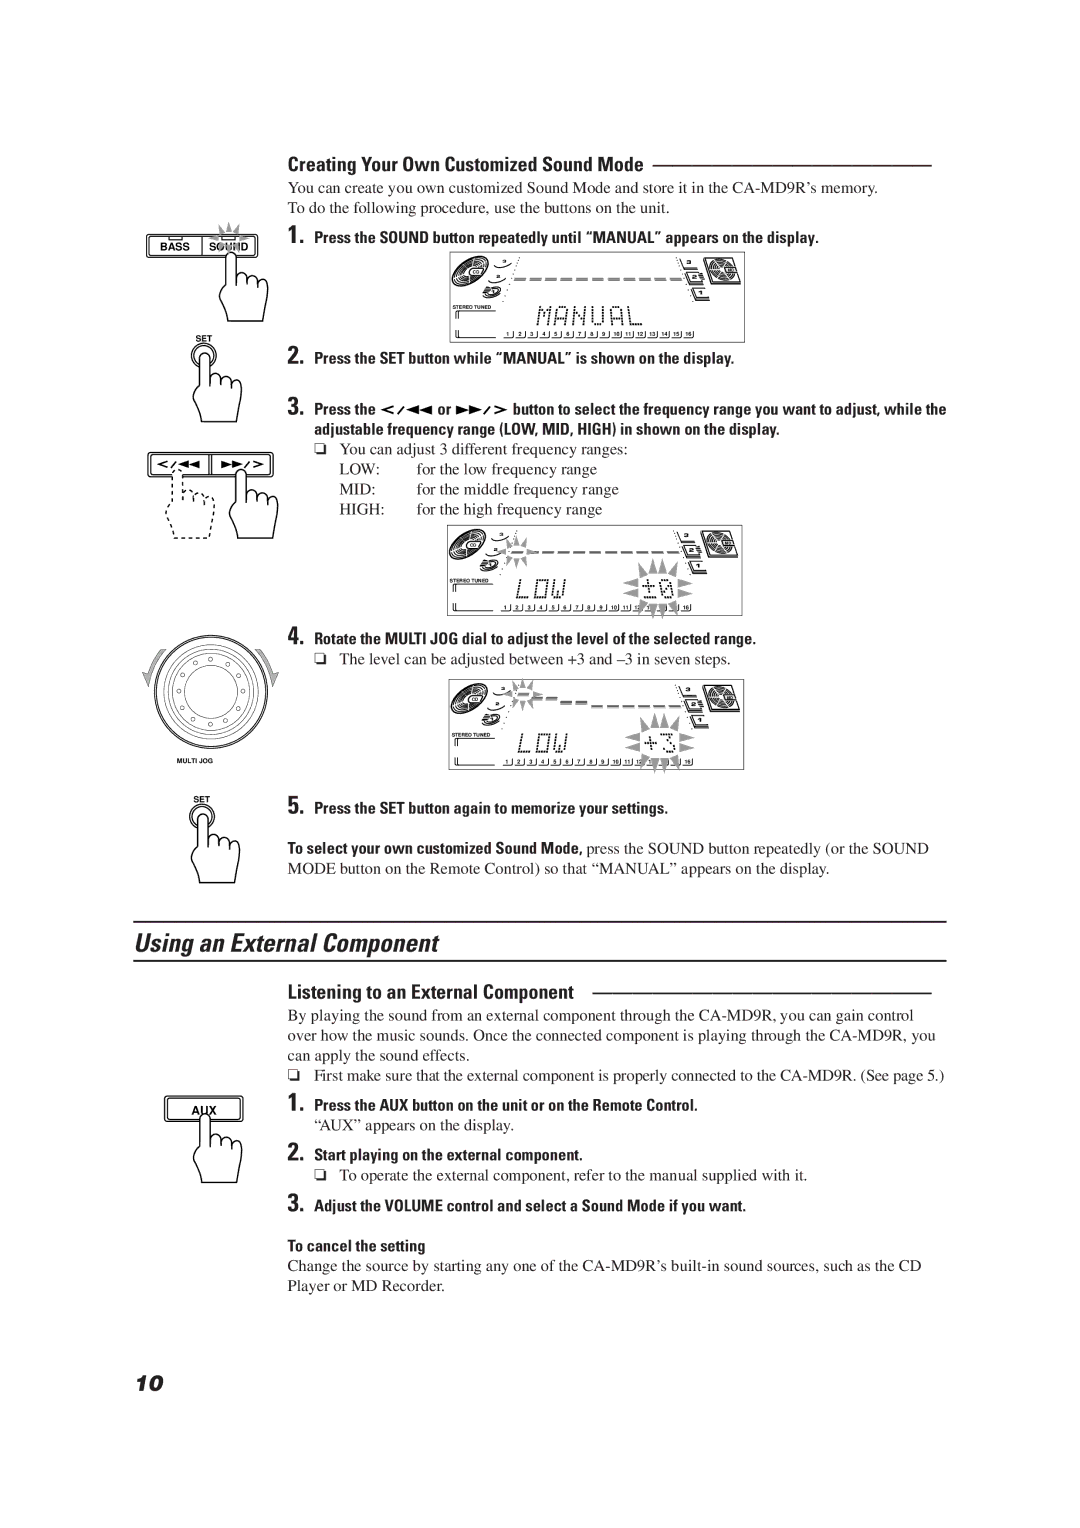 JVC CA-MD9R manual Using an External Component, Listening to an External Component, Creating Your Own Customized Sound Mode 